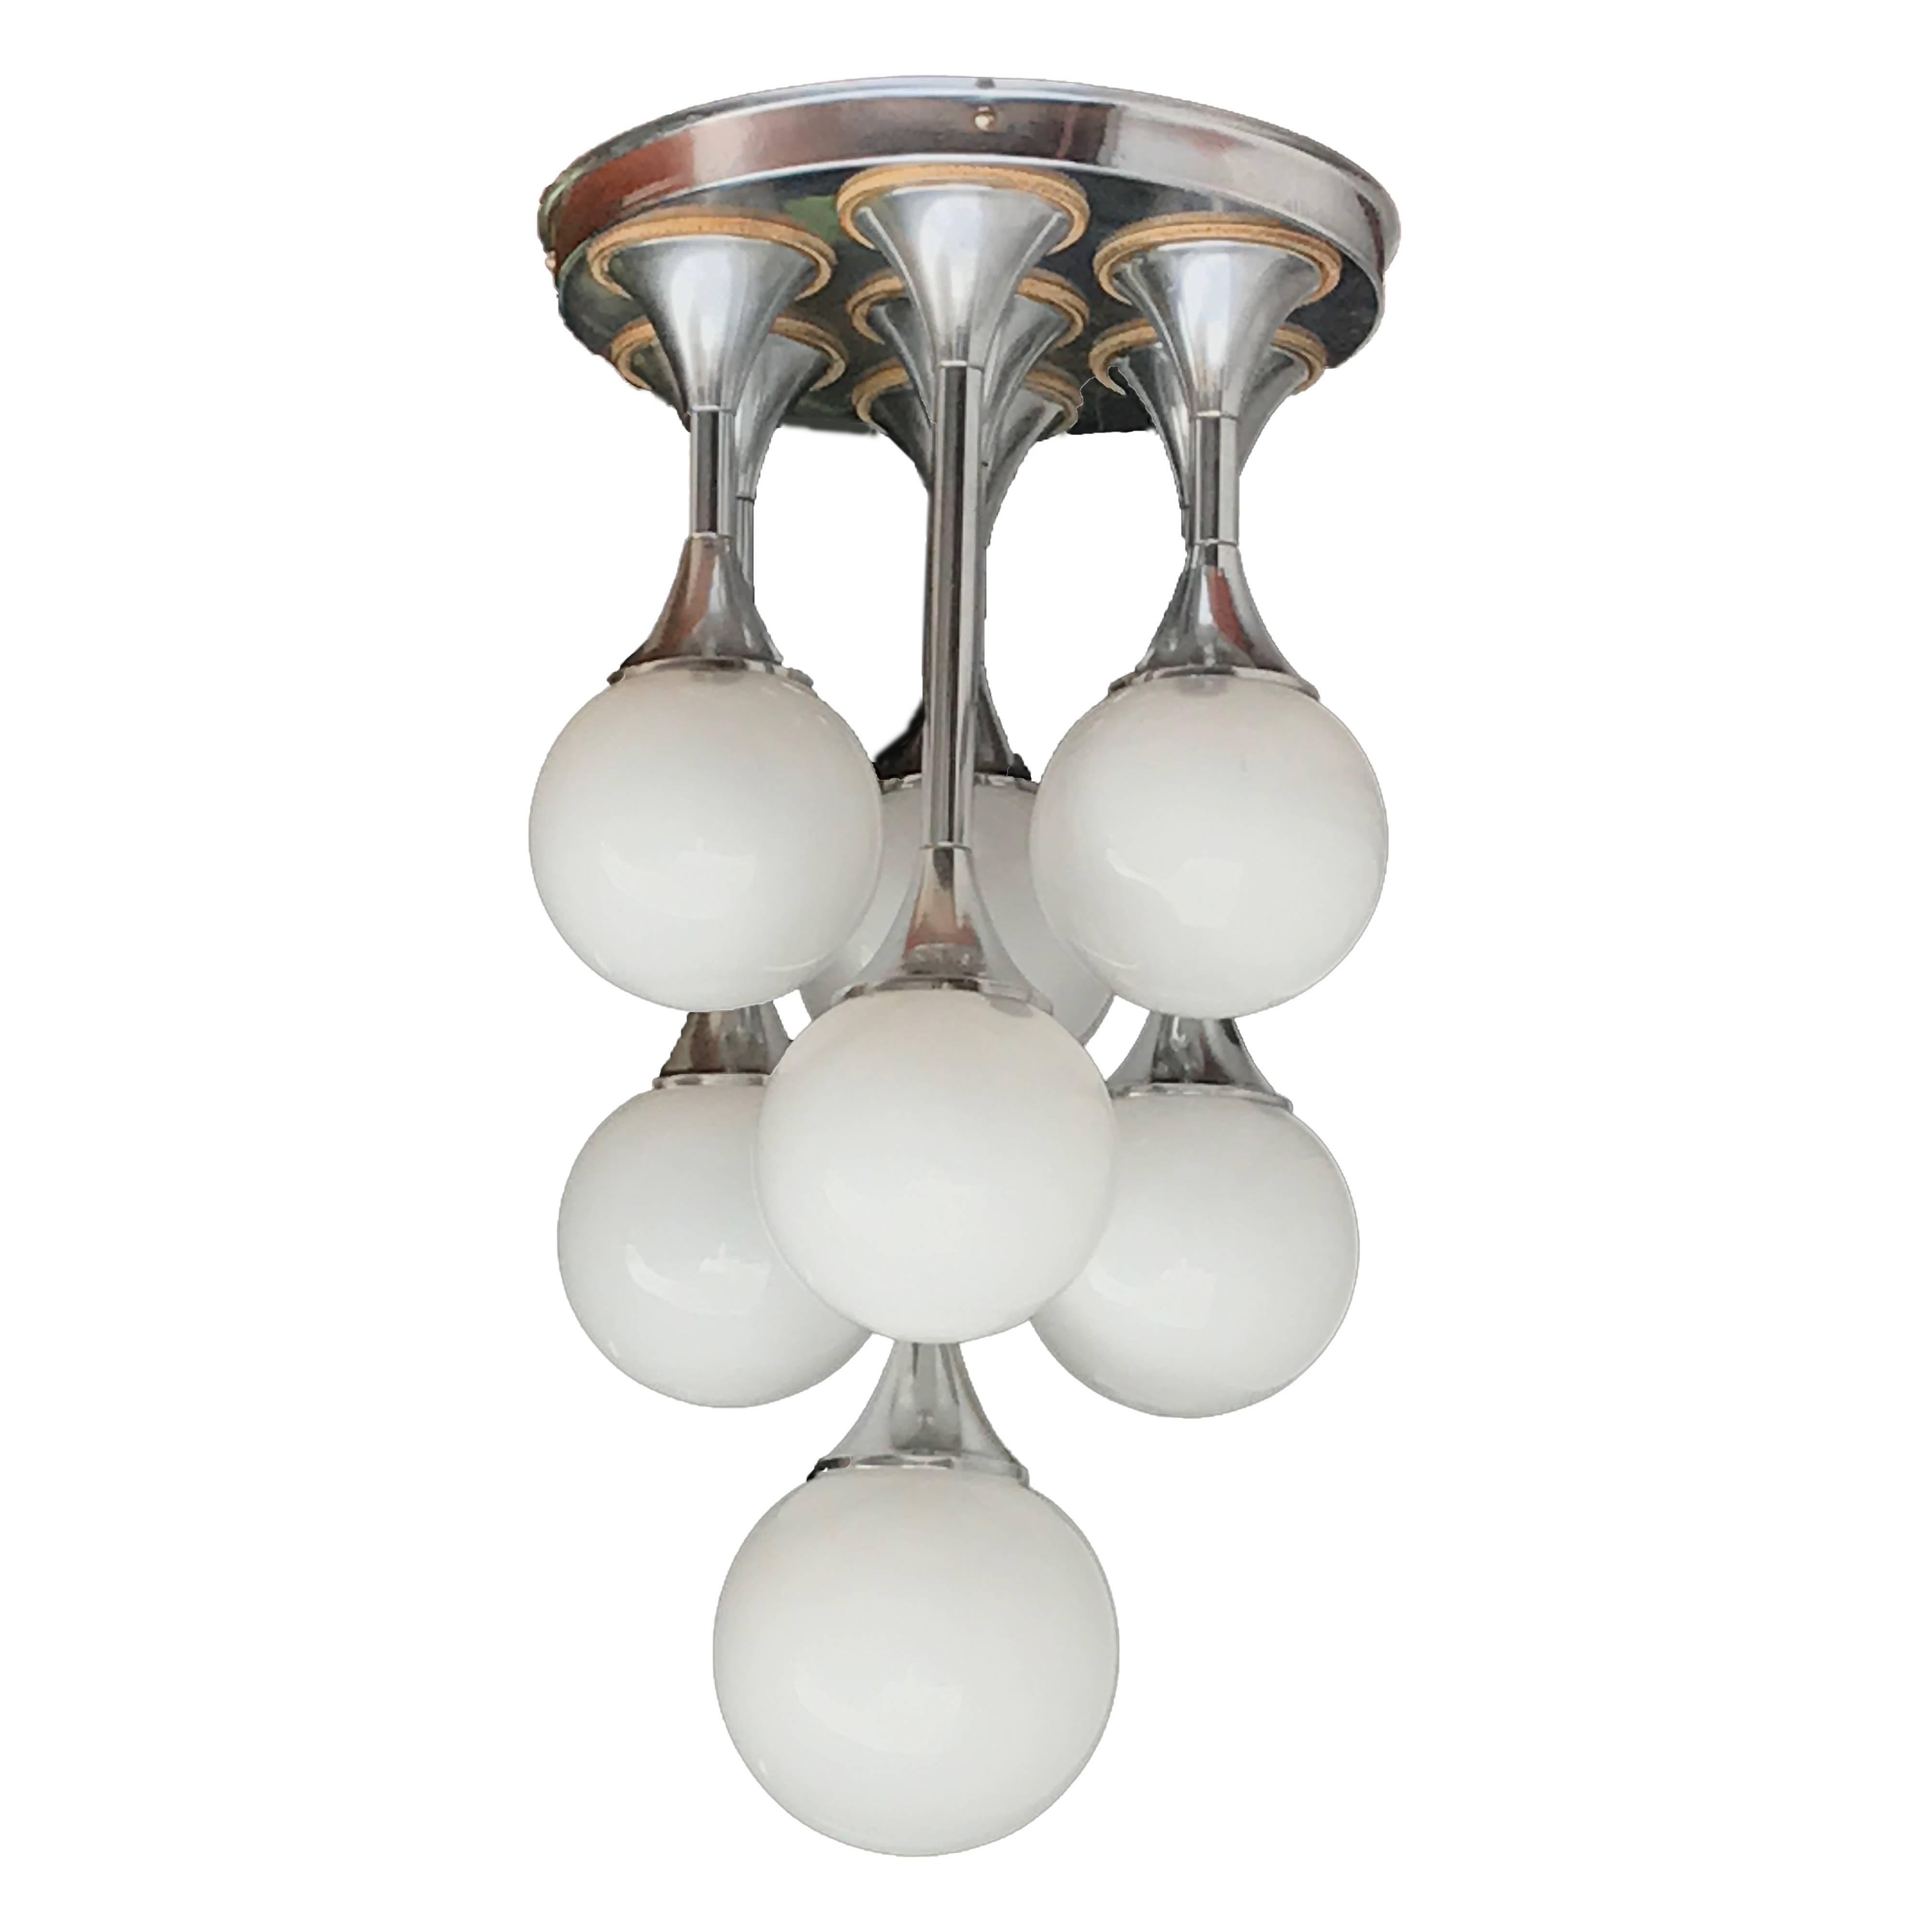 Space Age Seven Lights Chandelier Chrome and Glass Italian Lighting, 1970s